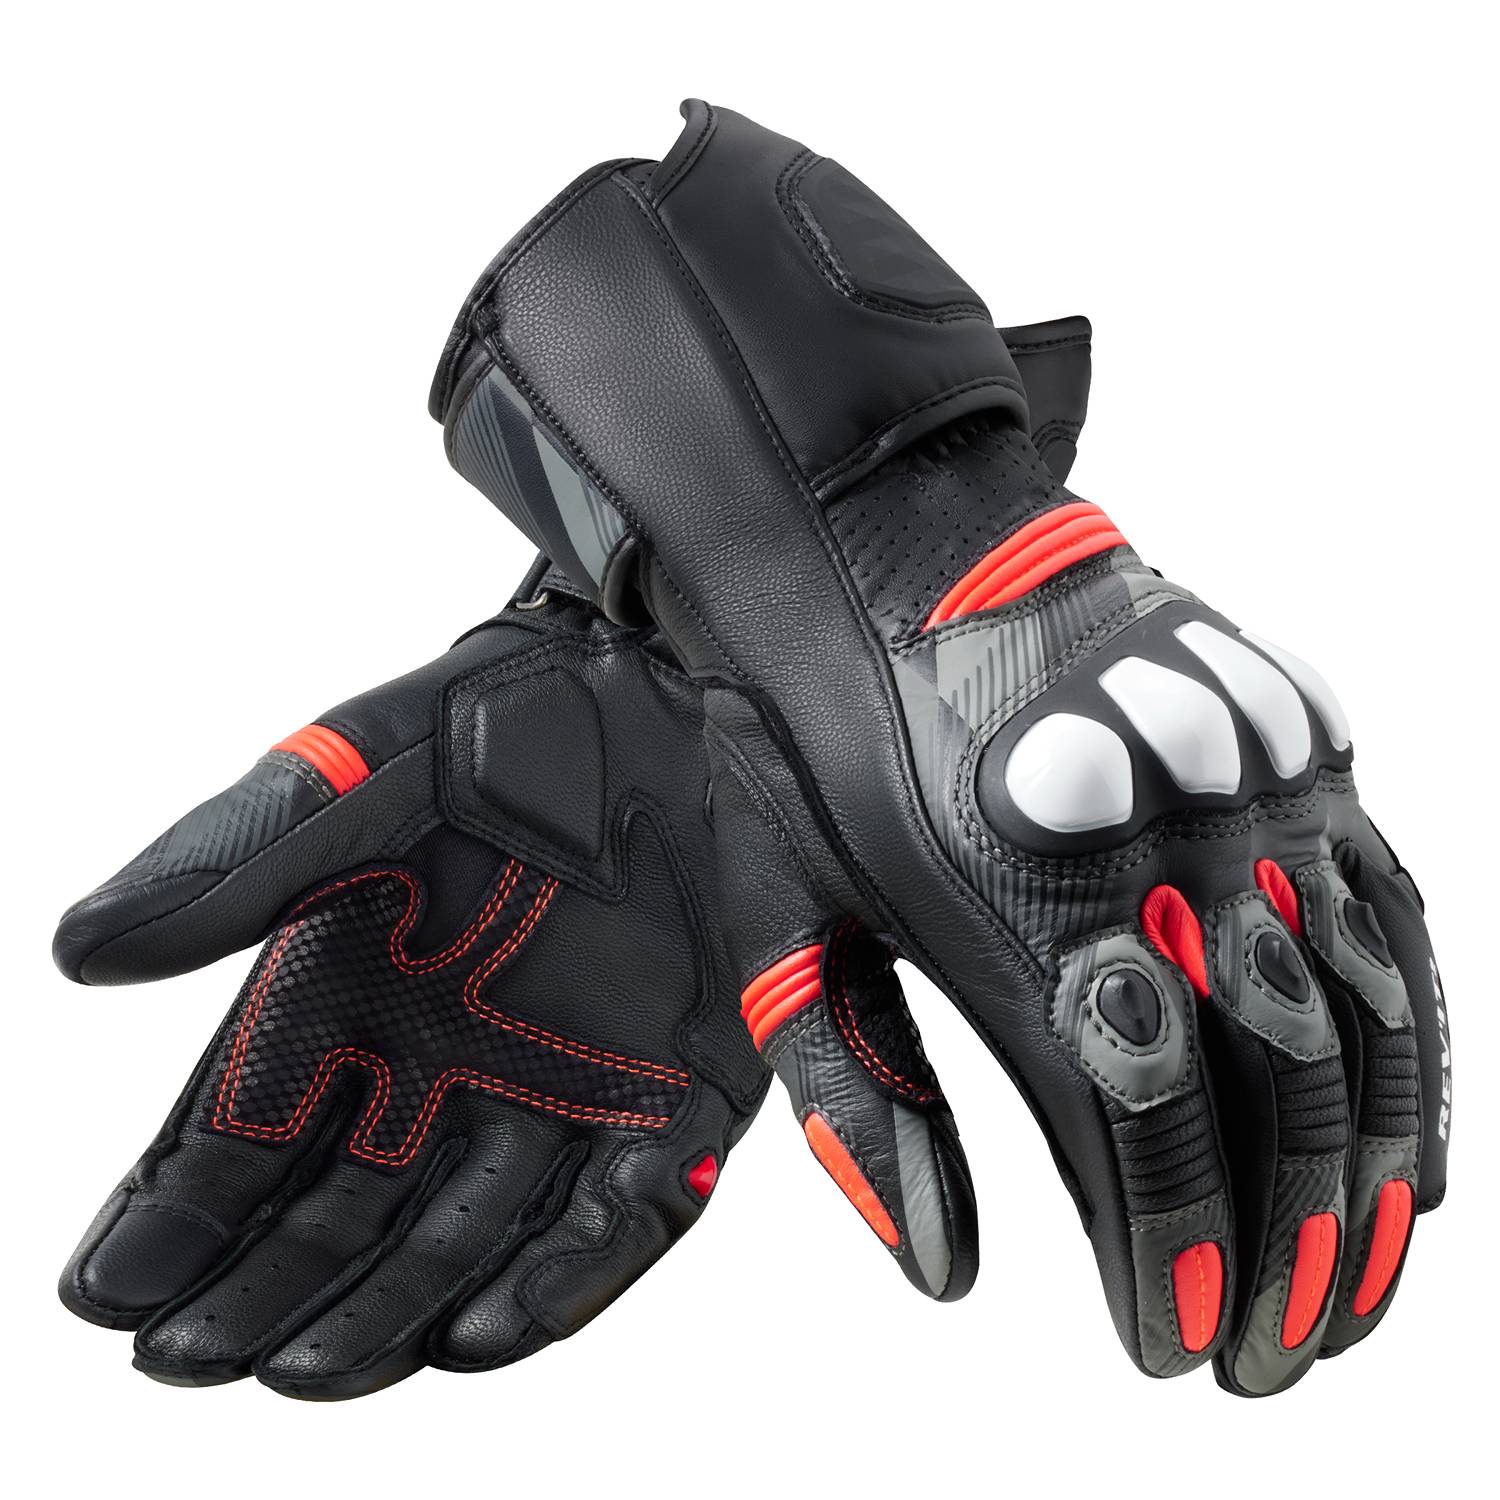 Image of REV'IT! League 2 Gloves Black Neon Red Size XL ID 8700001360753